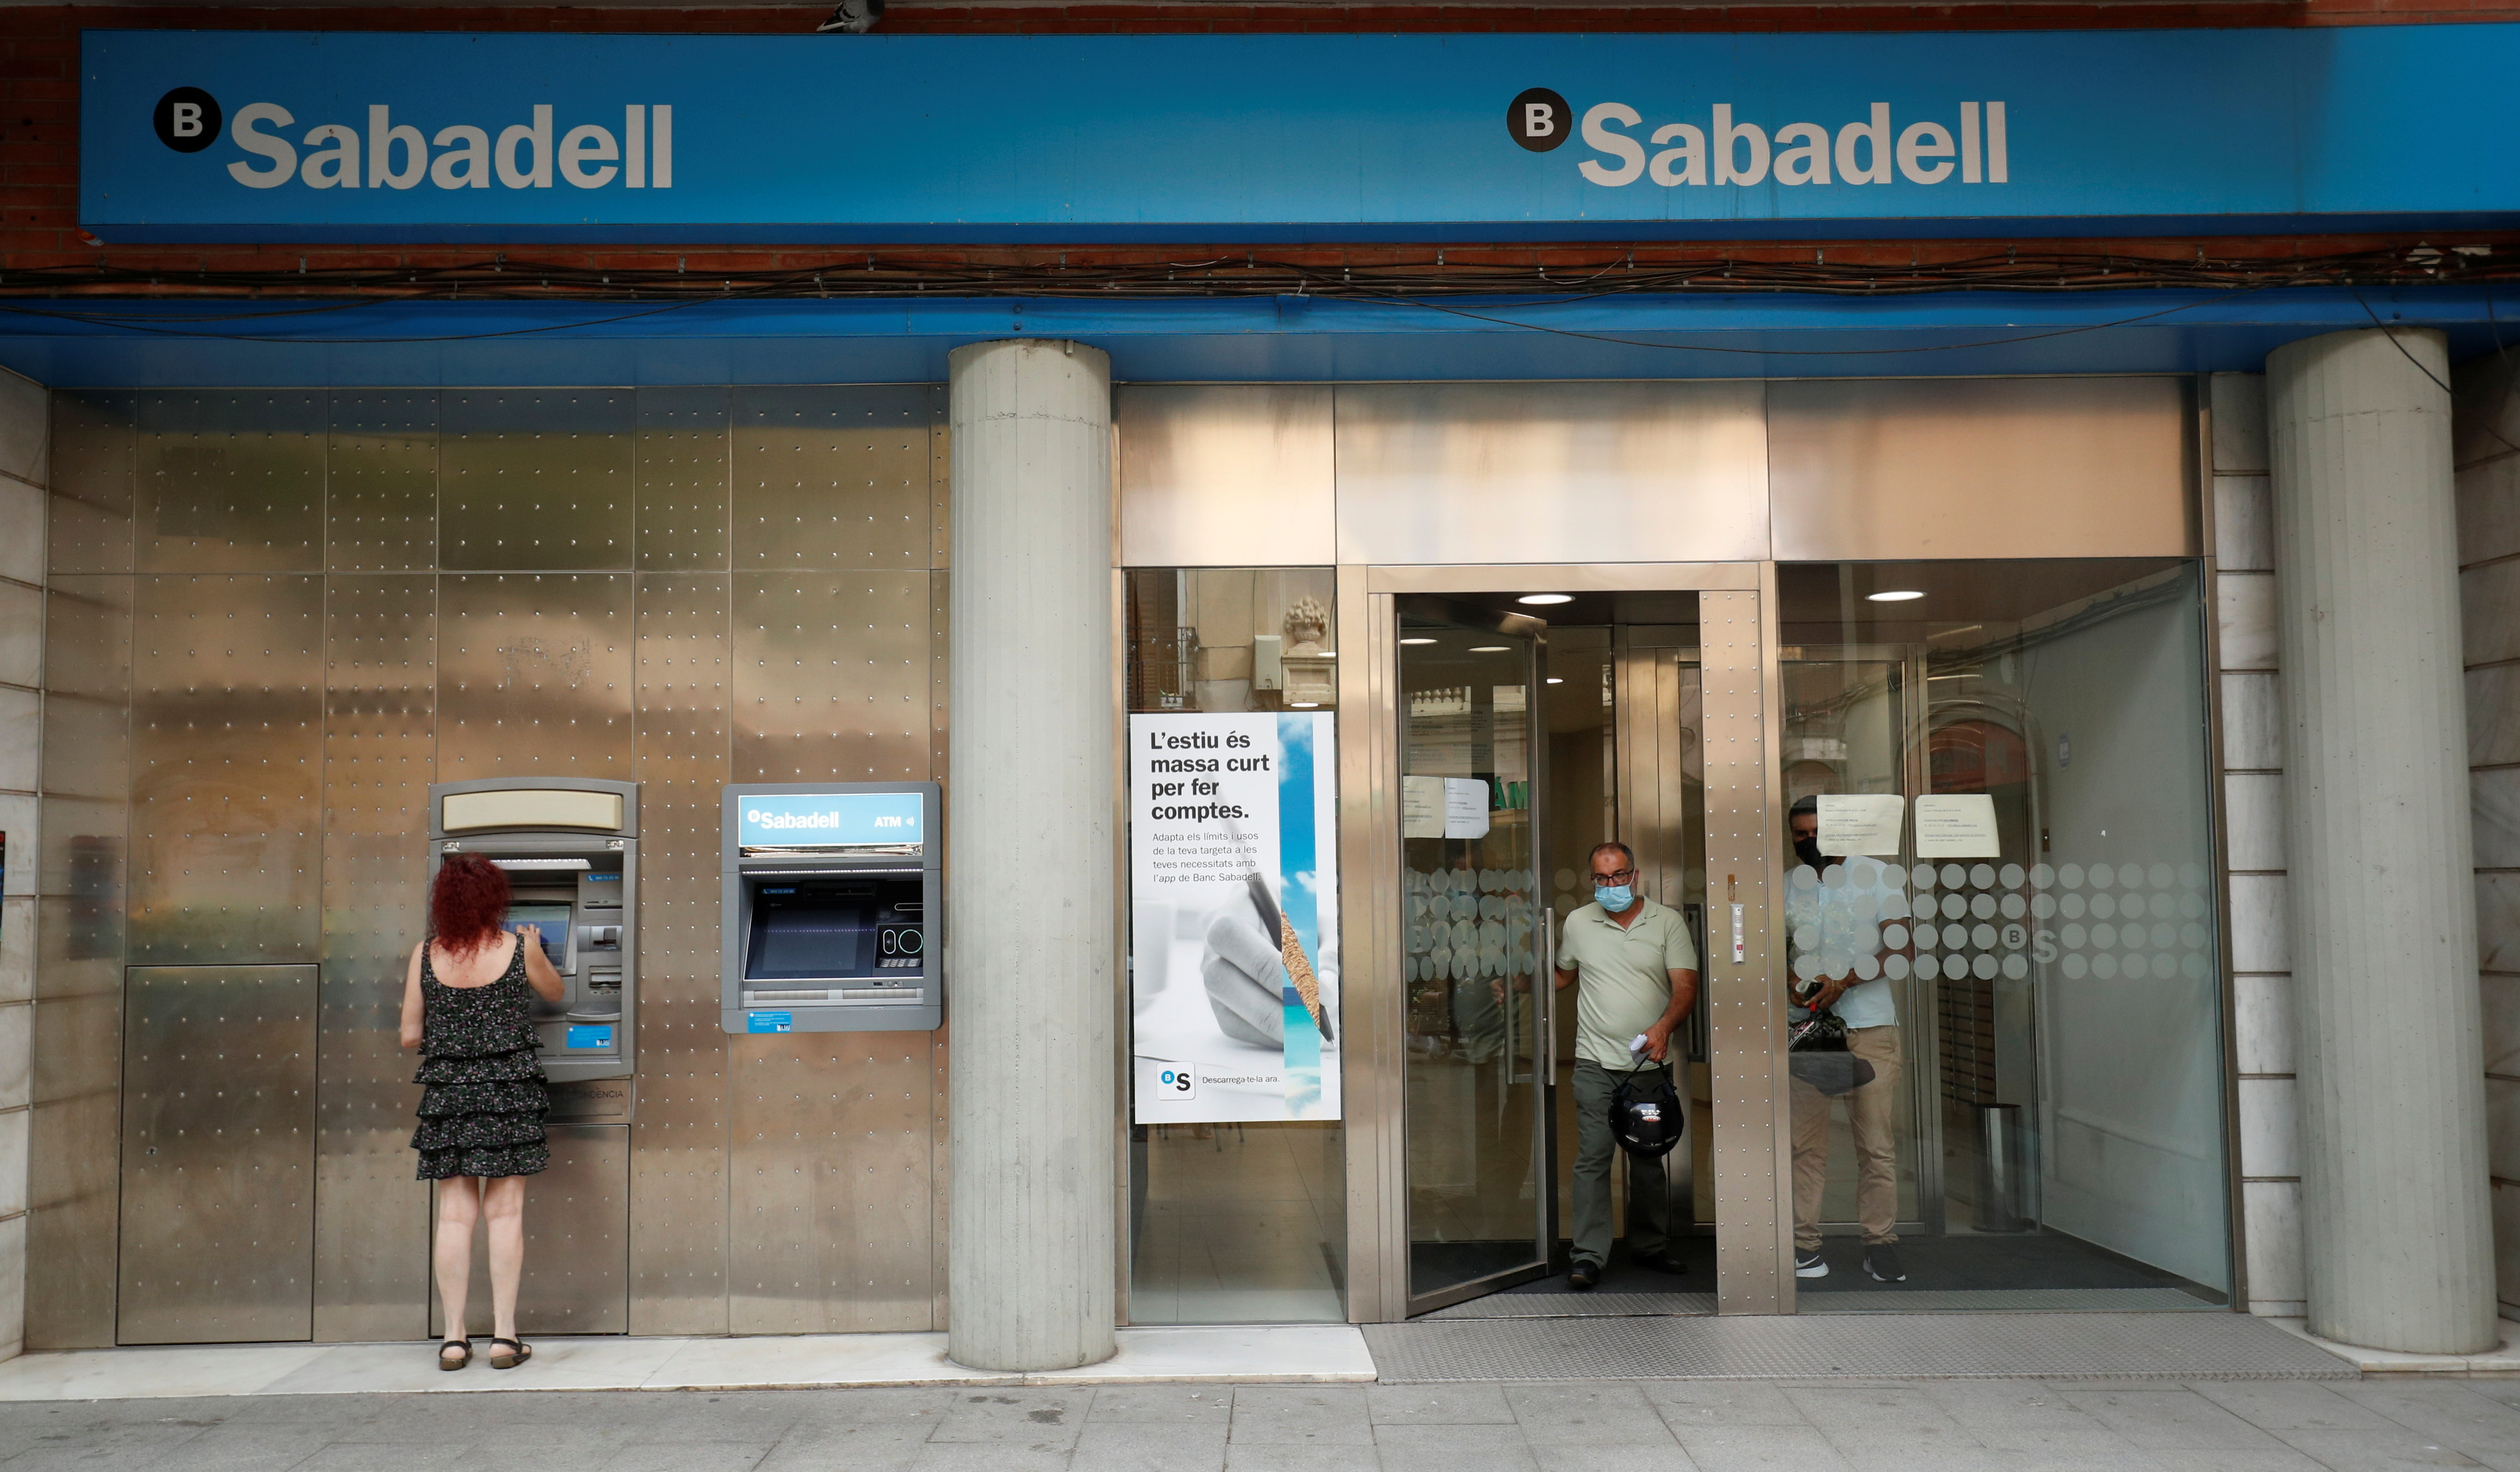 A woman uses an ATM machine as people leave a Sabadell bank office in Barcelona